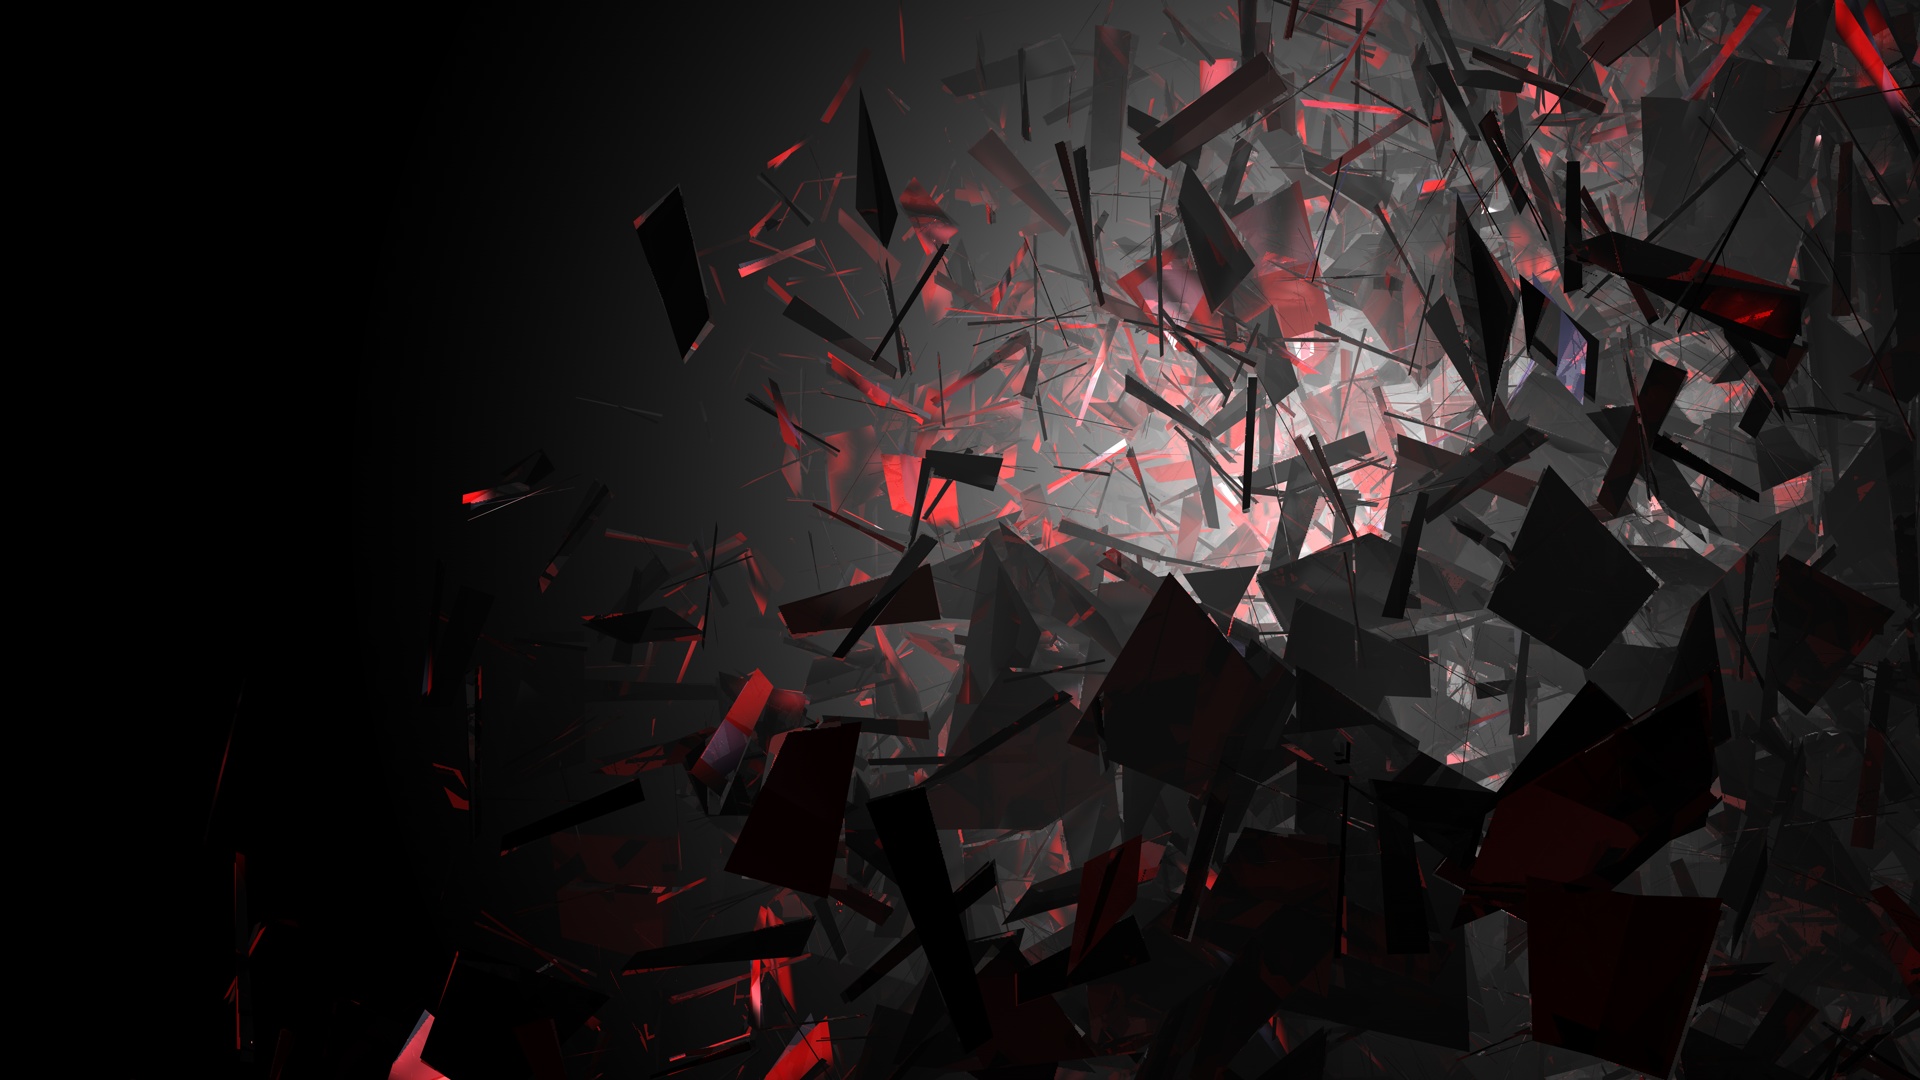 dark, abstract, red High Definition image